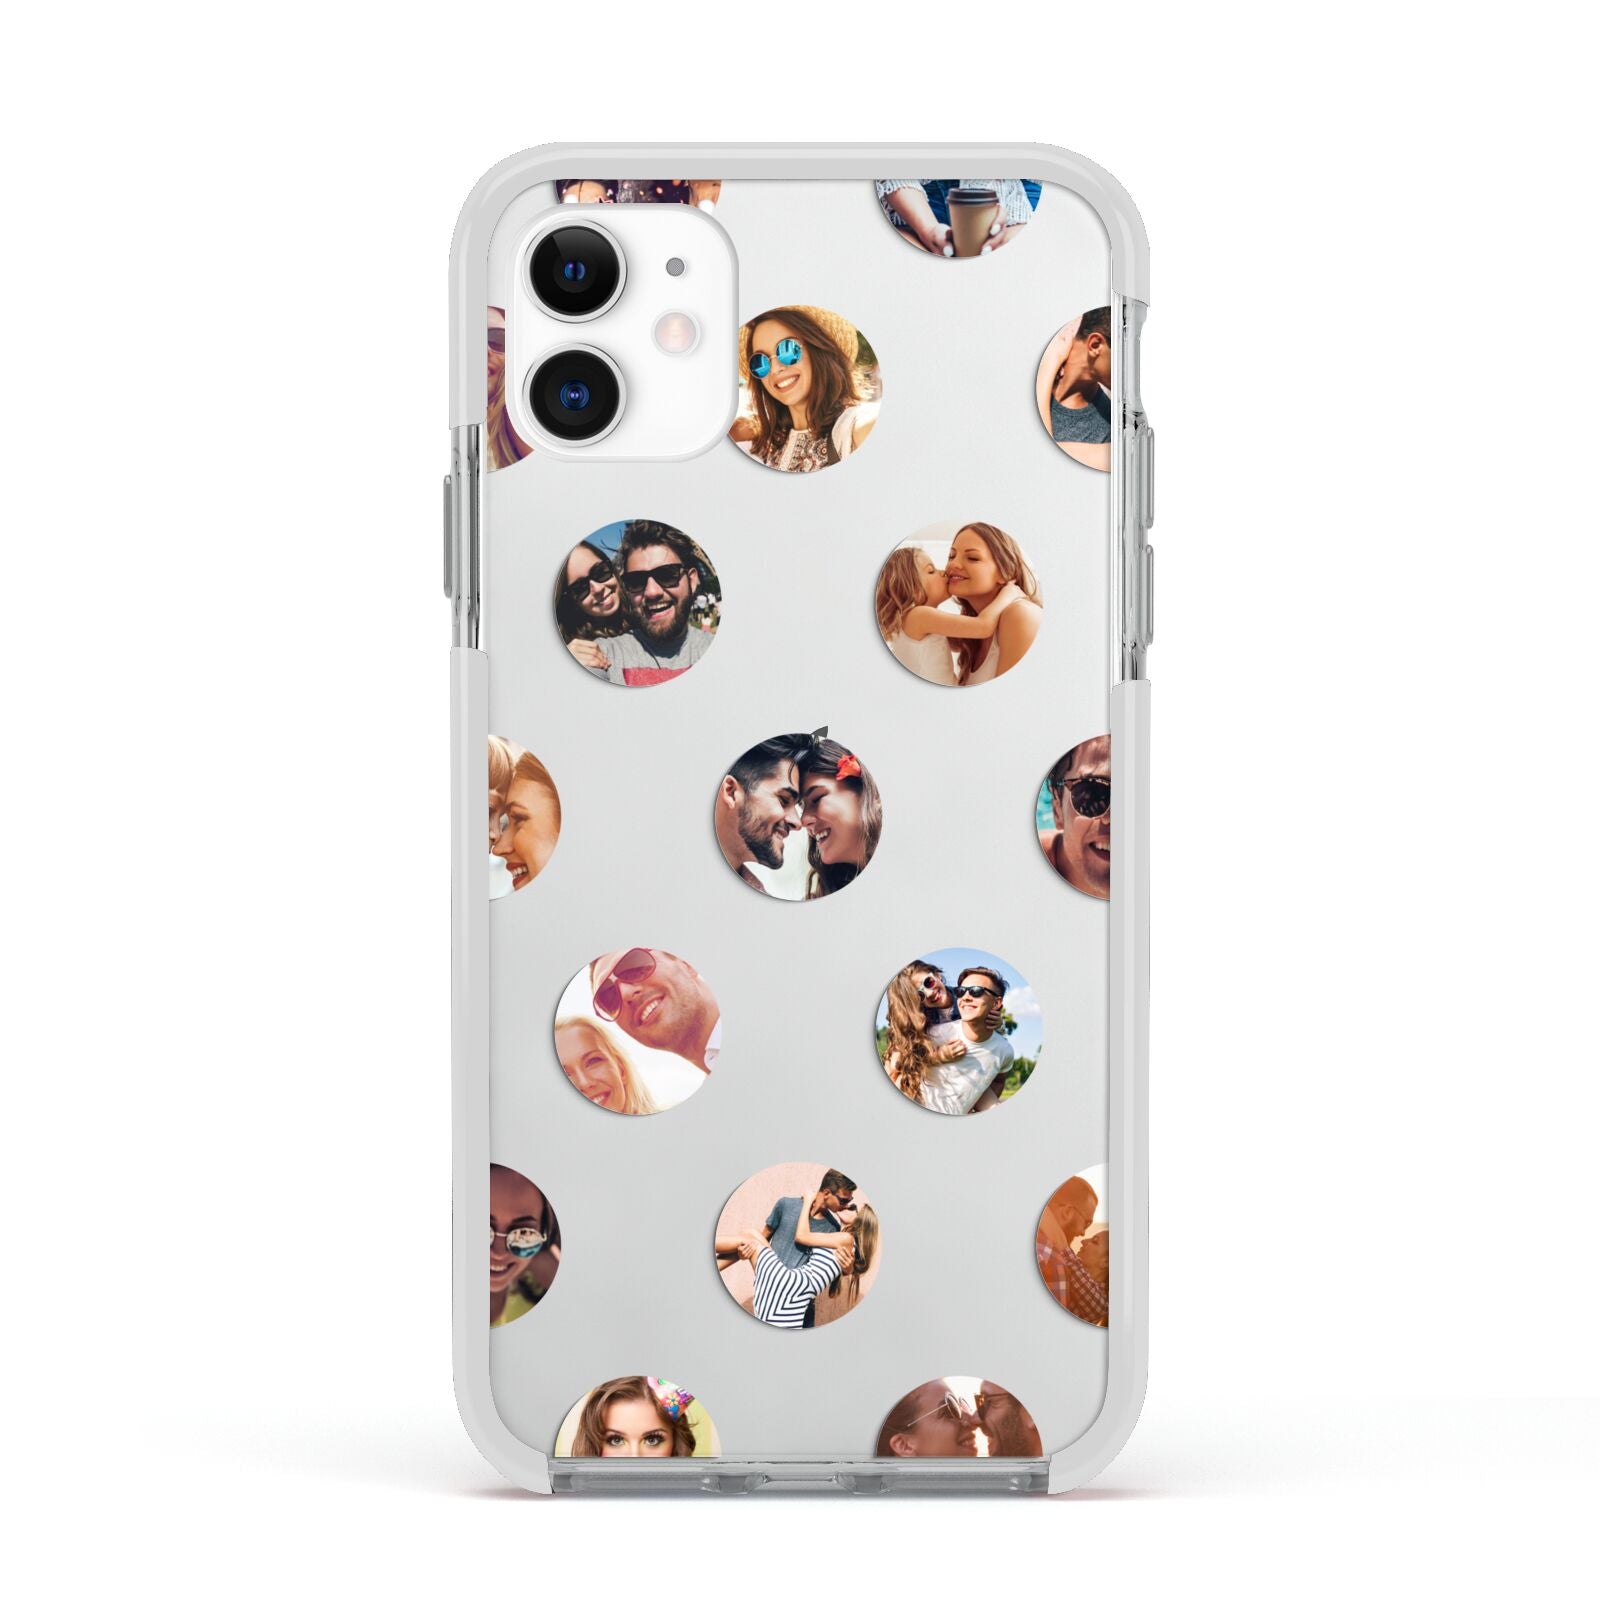 Polka Dot Photo Montage Upload Apple iPhone 11 in White with White Impact Case